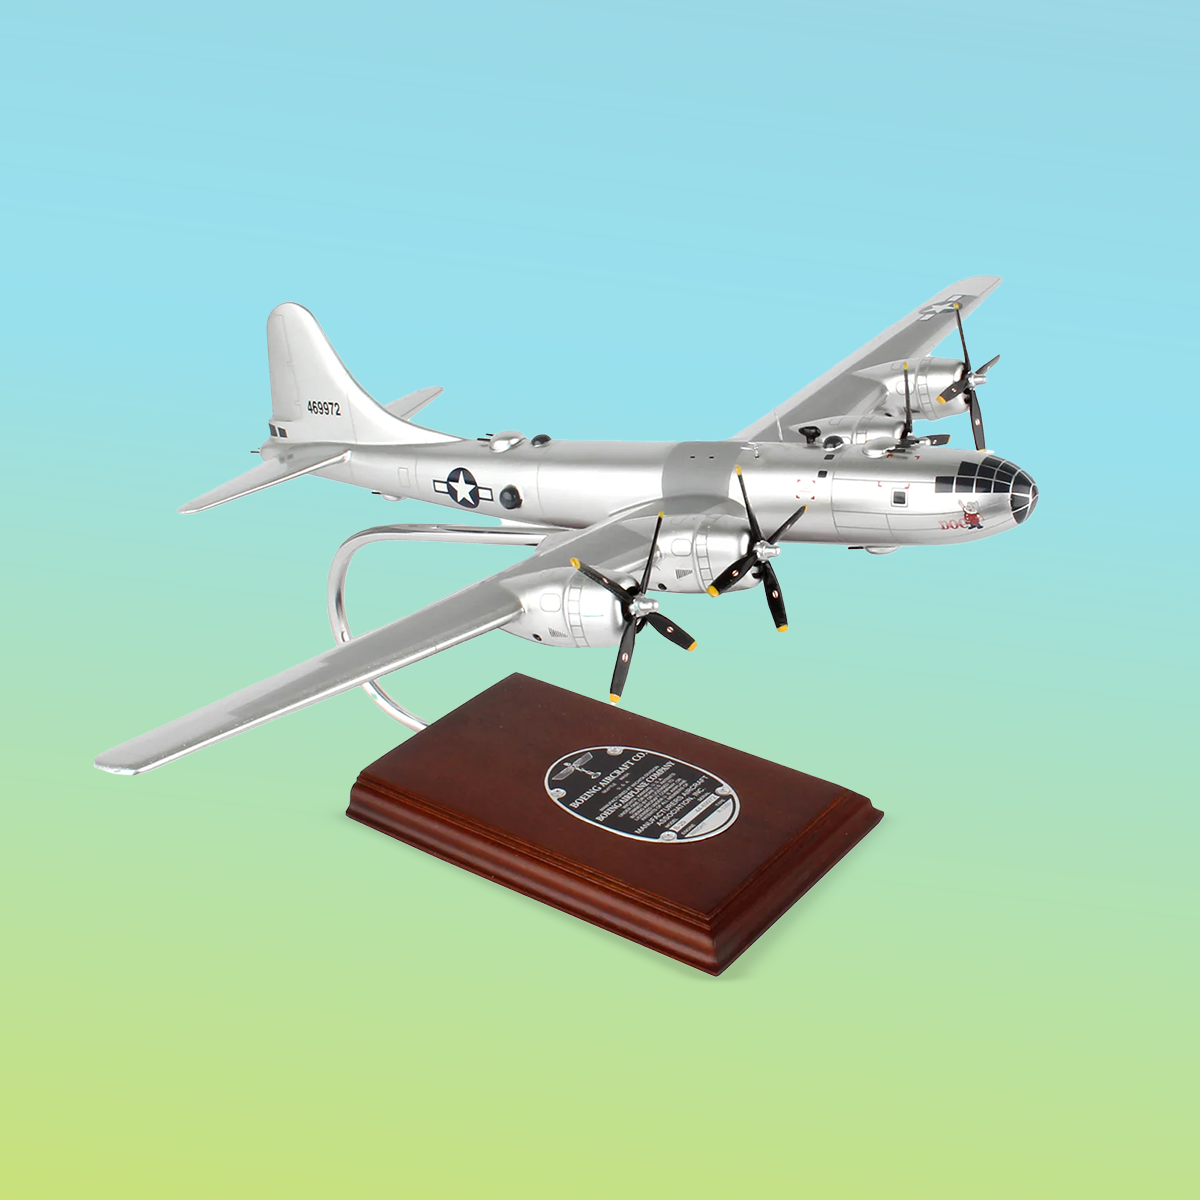 Small Models Mosaic tile featuring the B-52 heritage model with gradient background